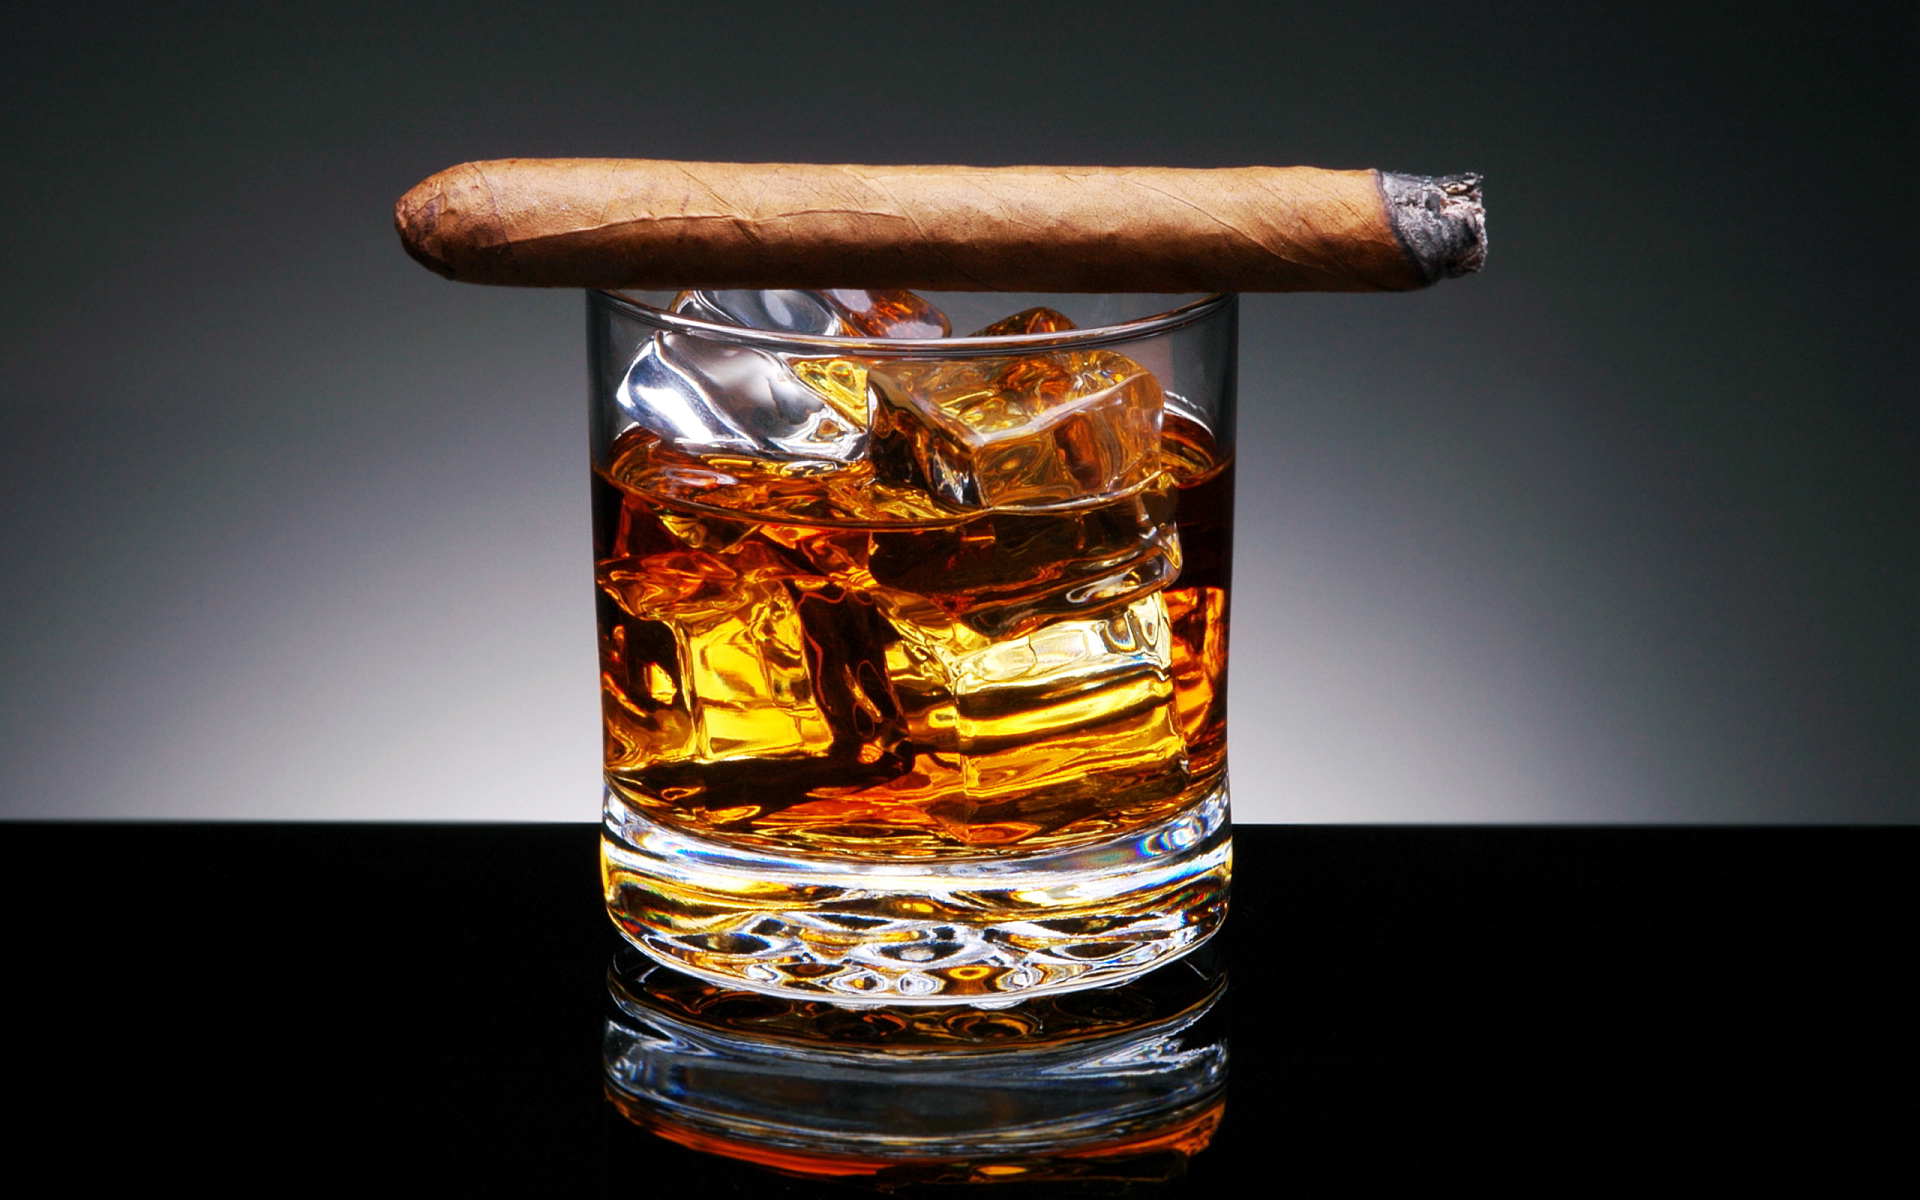 Cigar & Whisky Pairings For Every Stage Of Your Relationship (The Men’s Valentine’s Day Gift Guide)